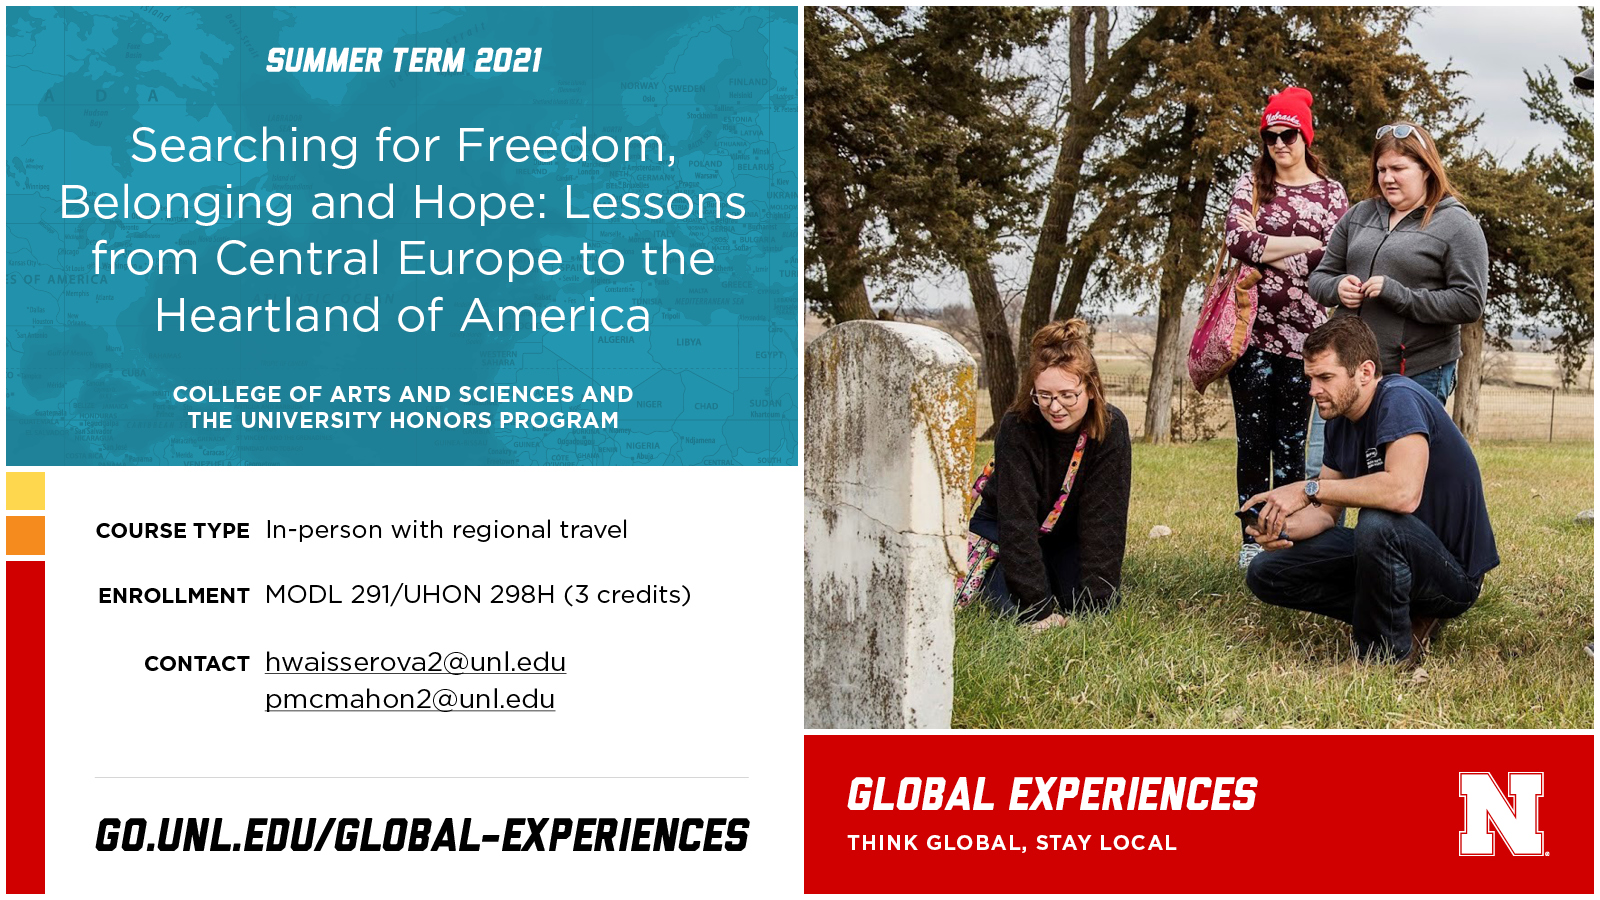 Summer Global Experience: "Searching for Freedom, Belonging and Hope"